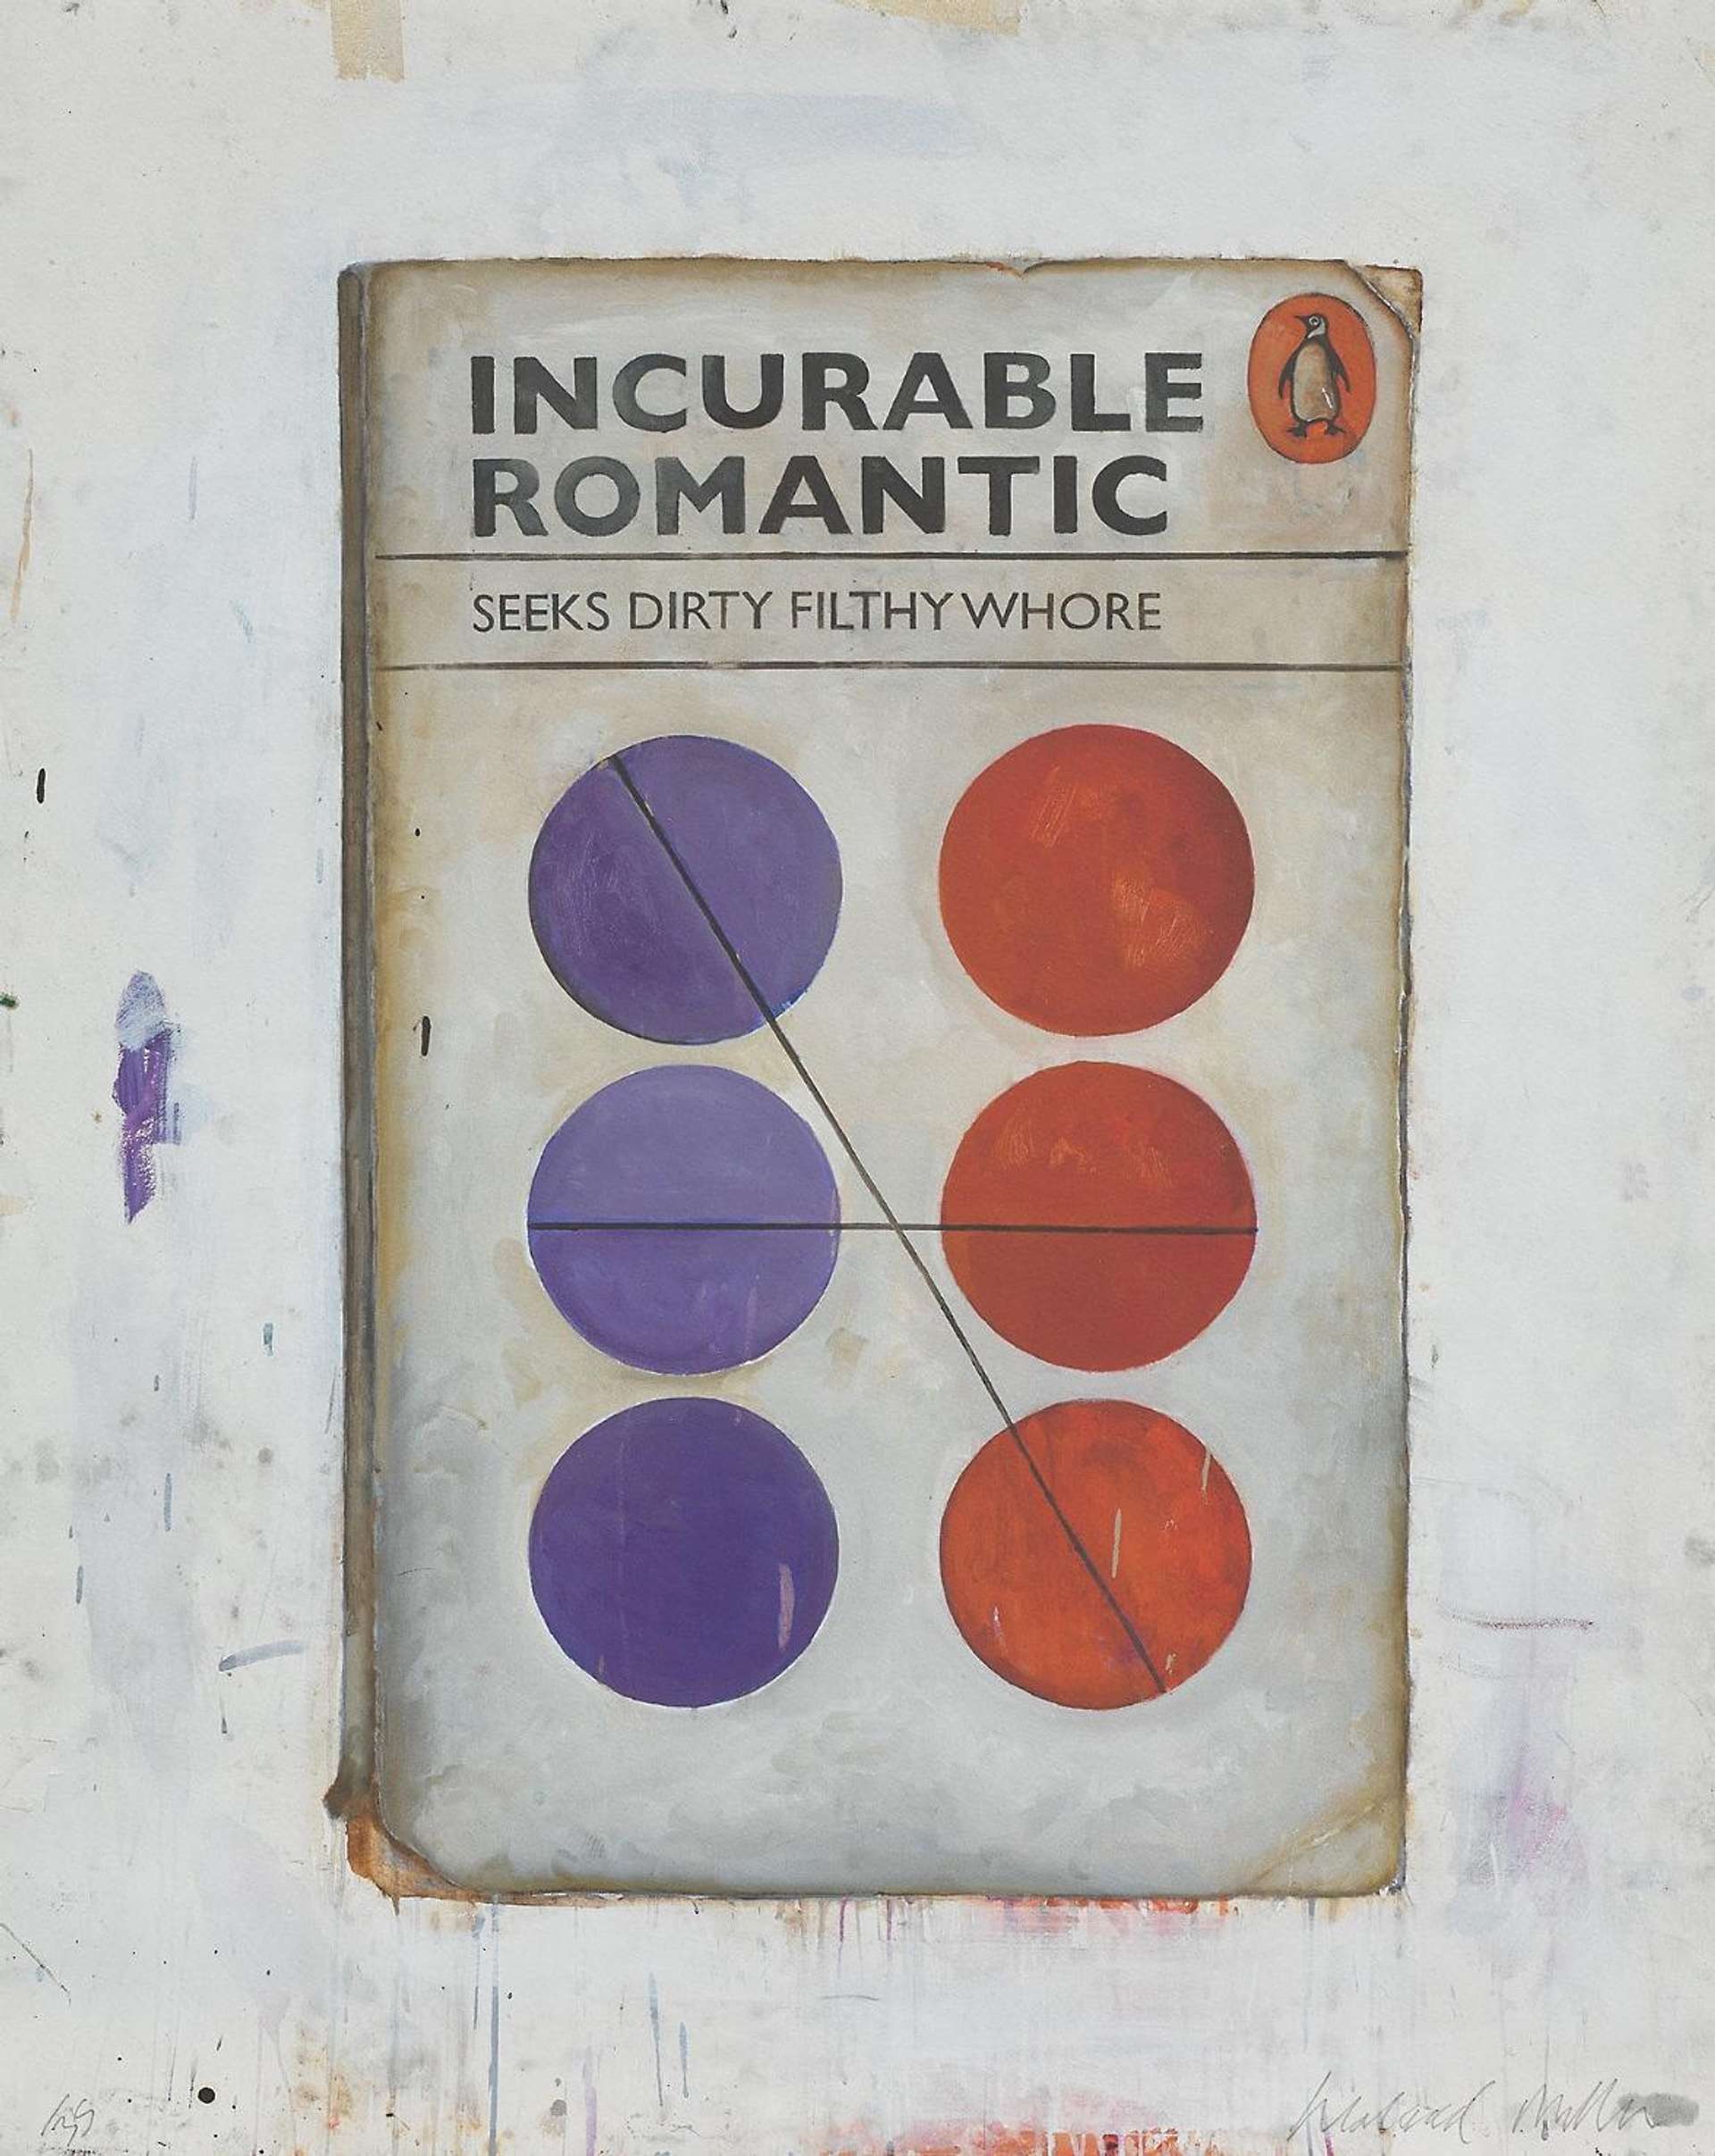 Incurable Romantic Seeks Dirty Filthy Whore - Signed Print by Harland Miller 2011 - MyArtBroker